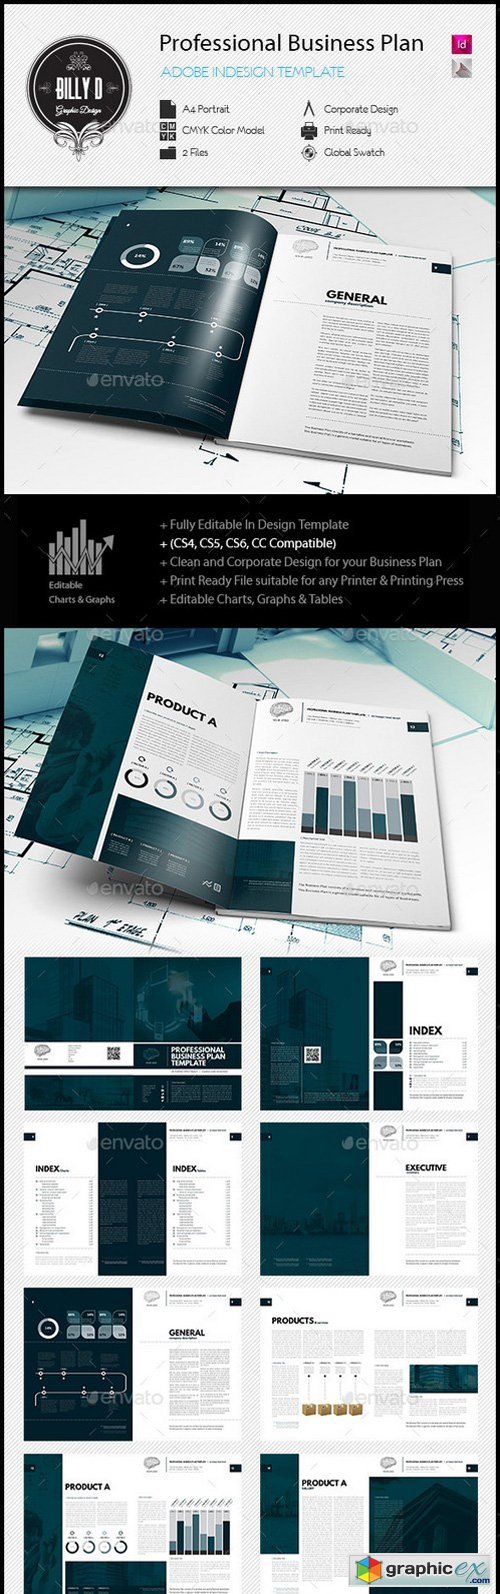 Professional Business Plan Template